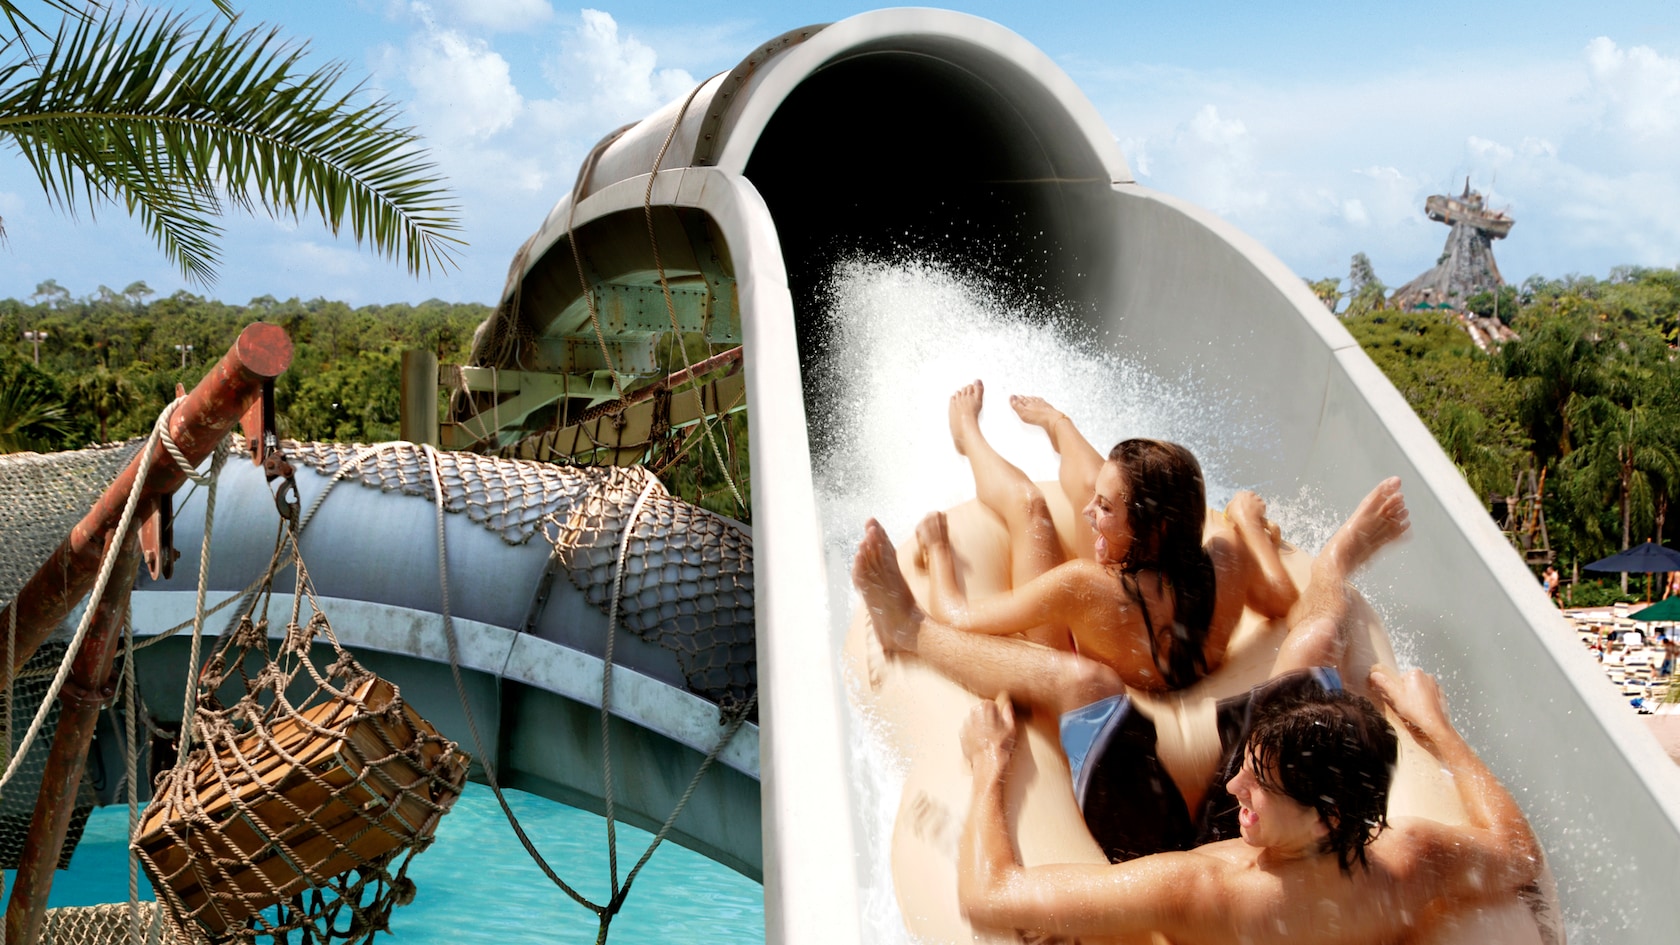 Crush 'n' Gusher, attraction
located at Disney's Typhoon Lagoon Water Park